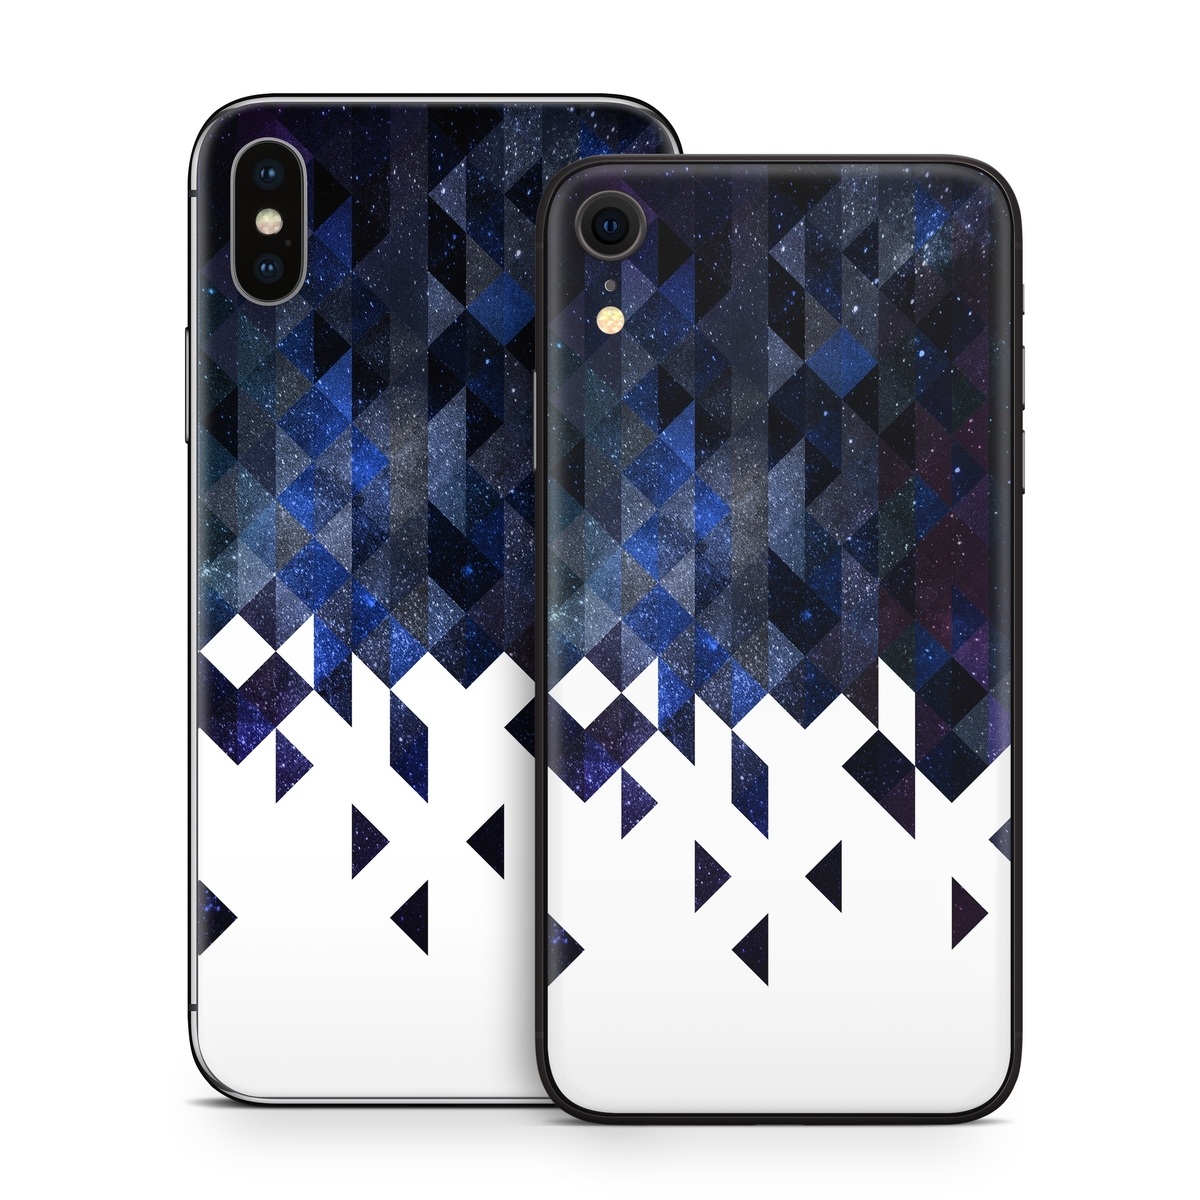 iPhone XS Skin design of Text, Pattern, Graphic design, Font, Purple, Design, Line, Triangle, Logo, Graphics, with black, blue, white colors